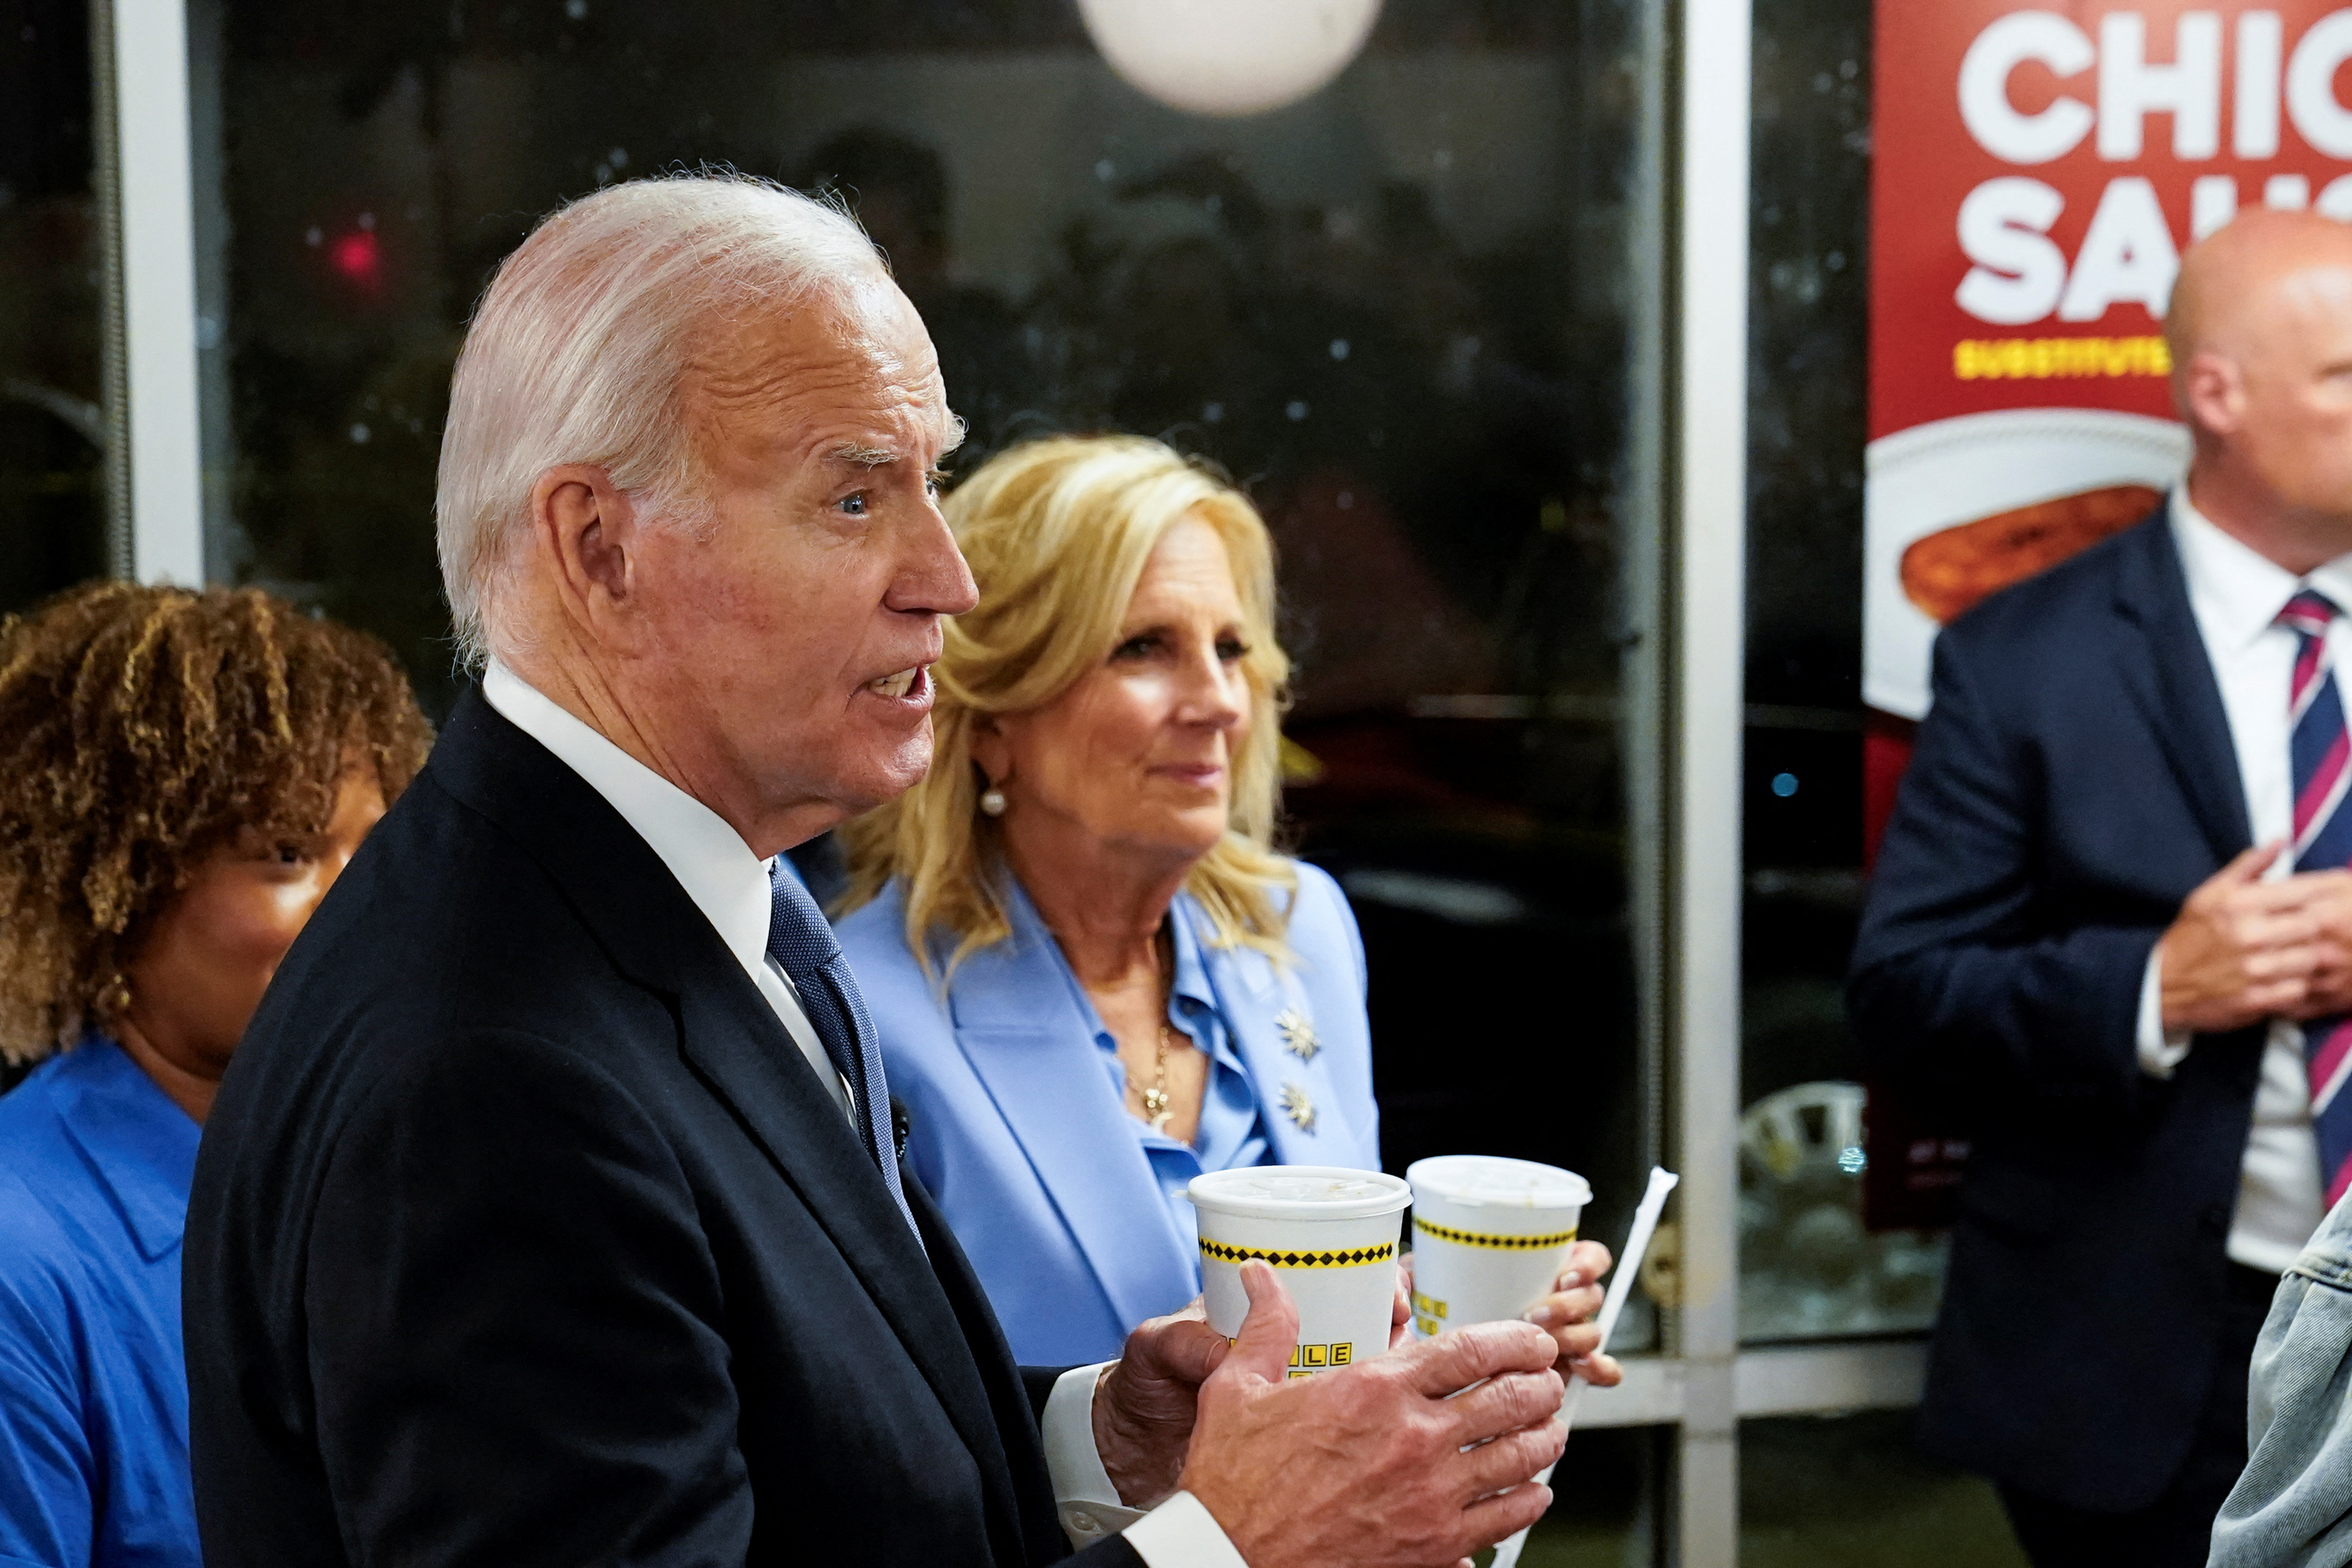 Biden’s shaky TV debate alarms Democrats, thoughts of replacing him as their candidate